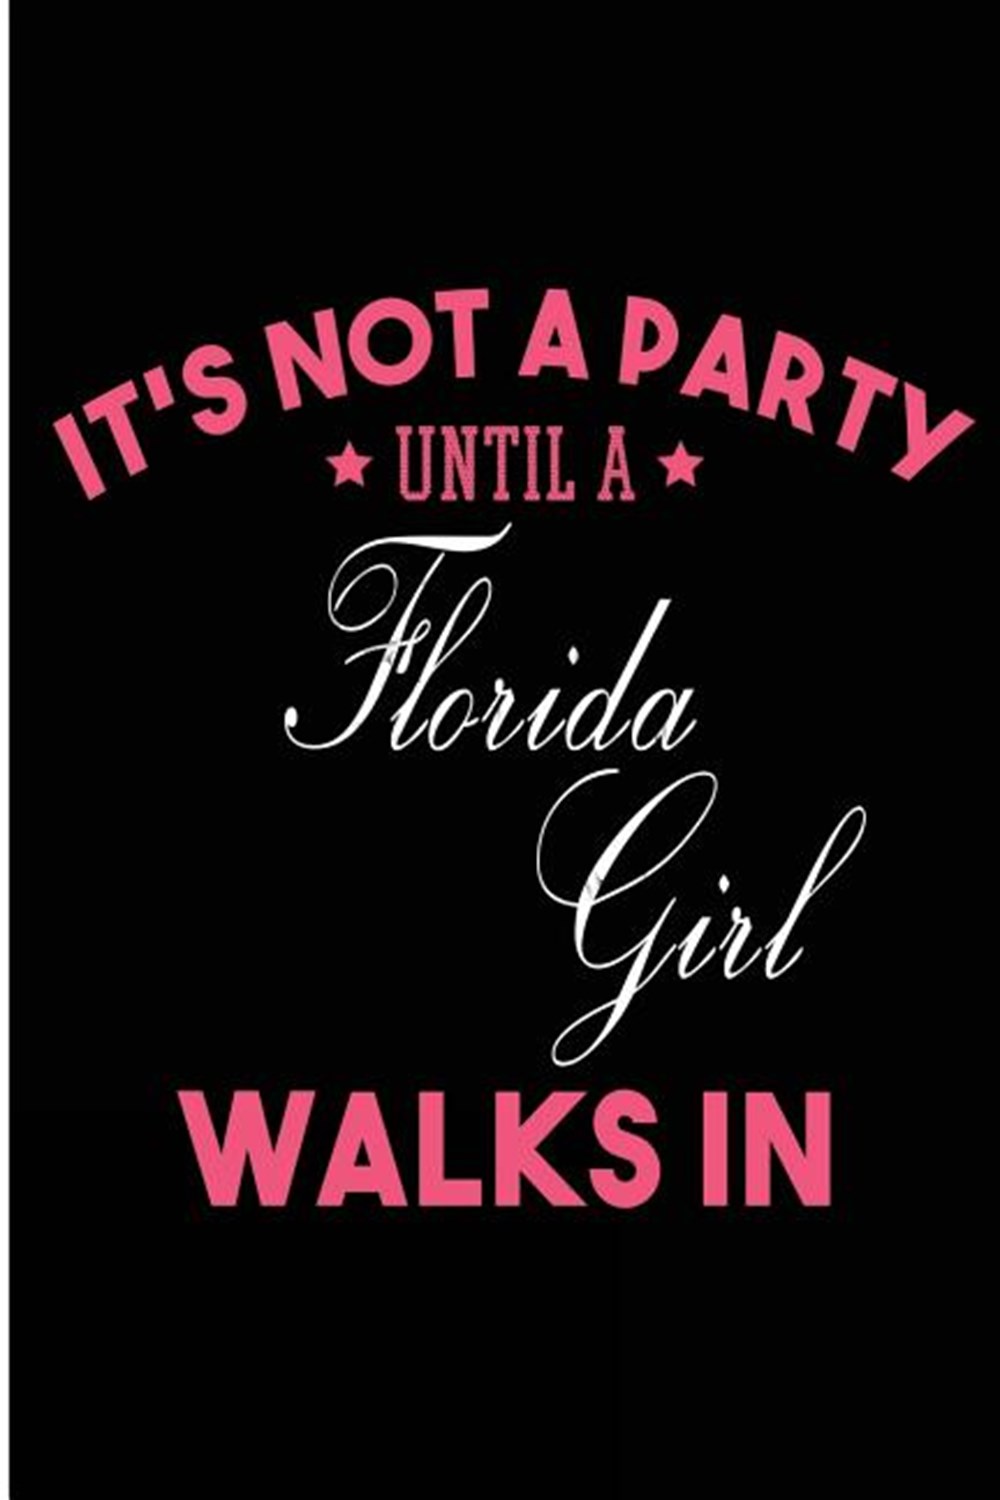 It's Not a Party Until a Florida Girl Walks In Blank Lined Journal - Florida Girl Diary for Women